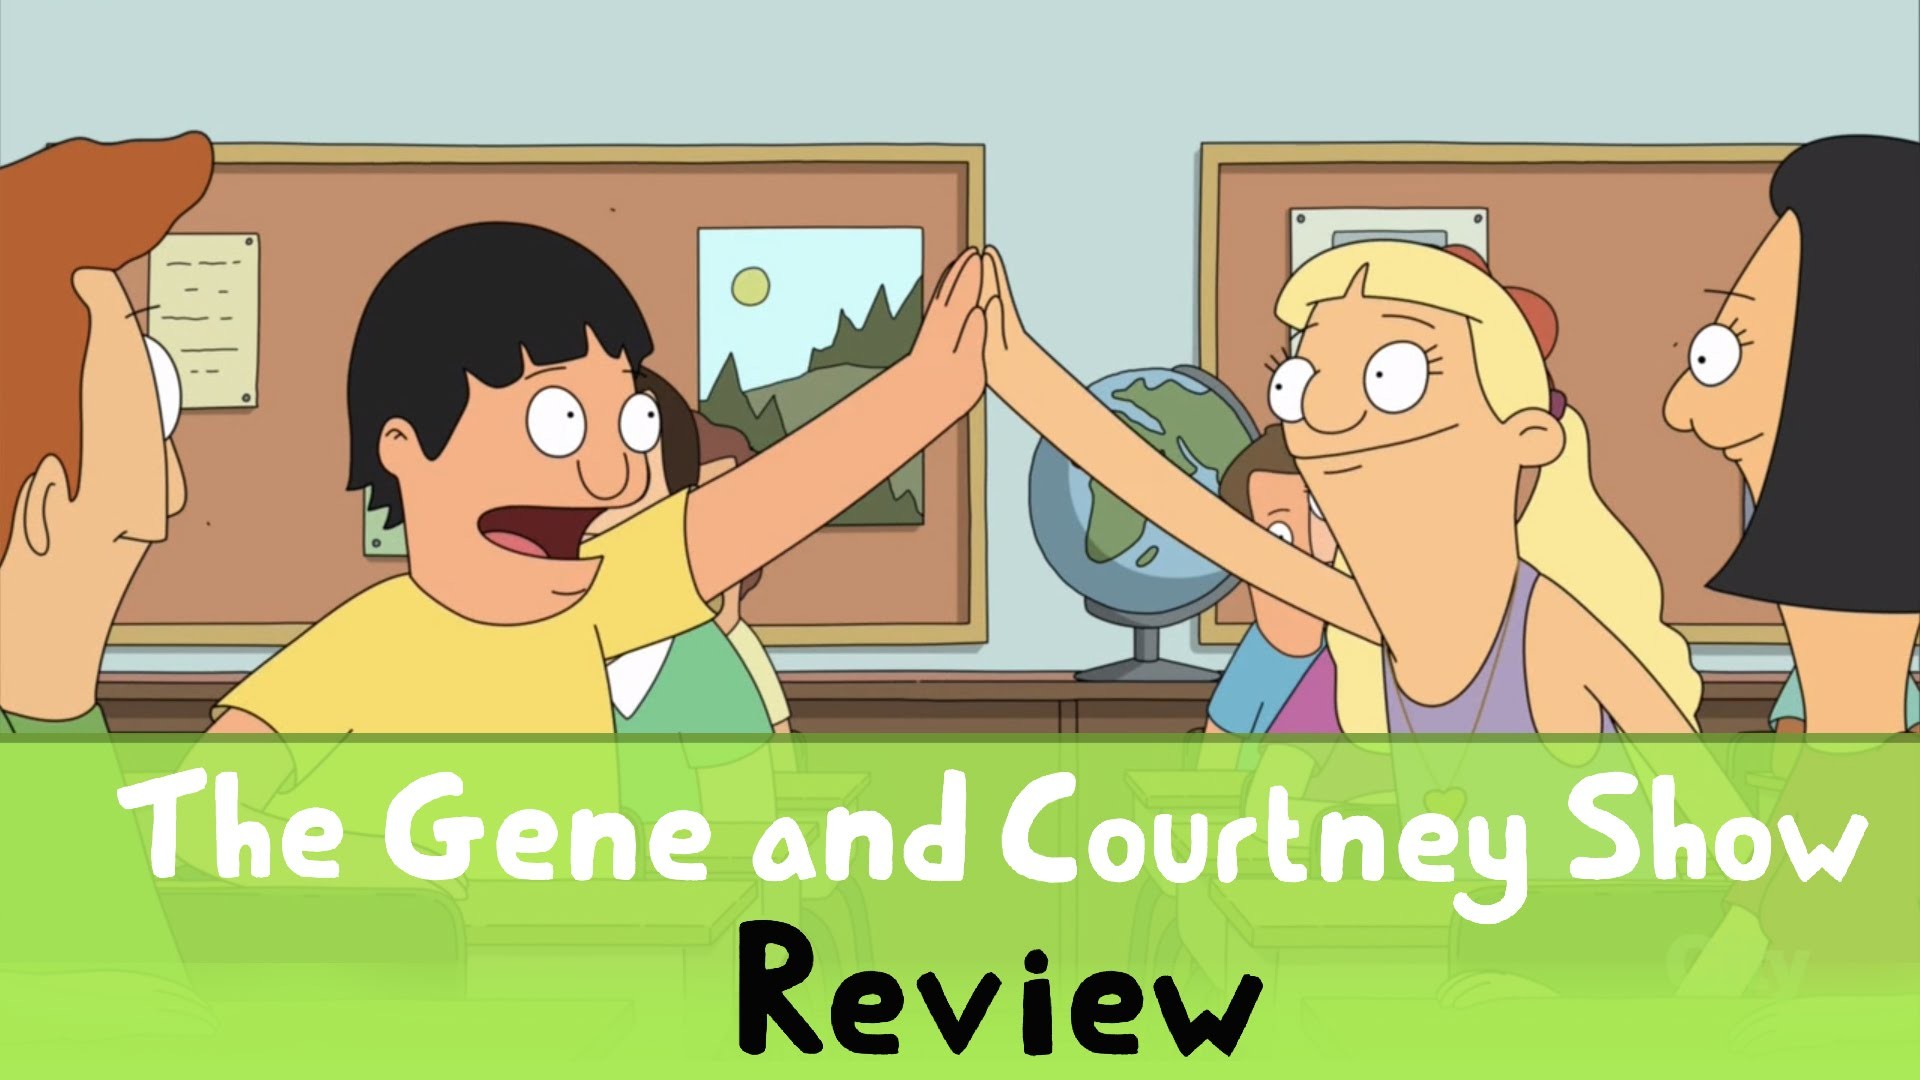 1920x1080 Bob's Burgers S6 - 'The Gene & Courtney Show' Review